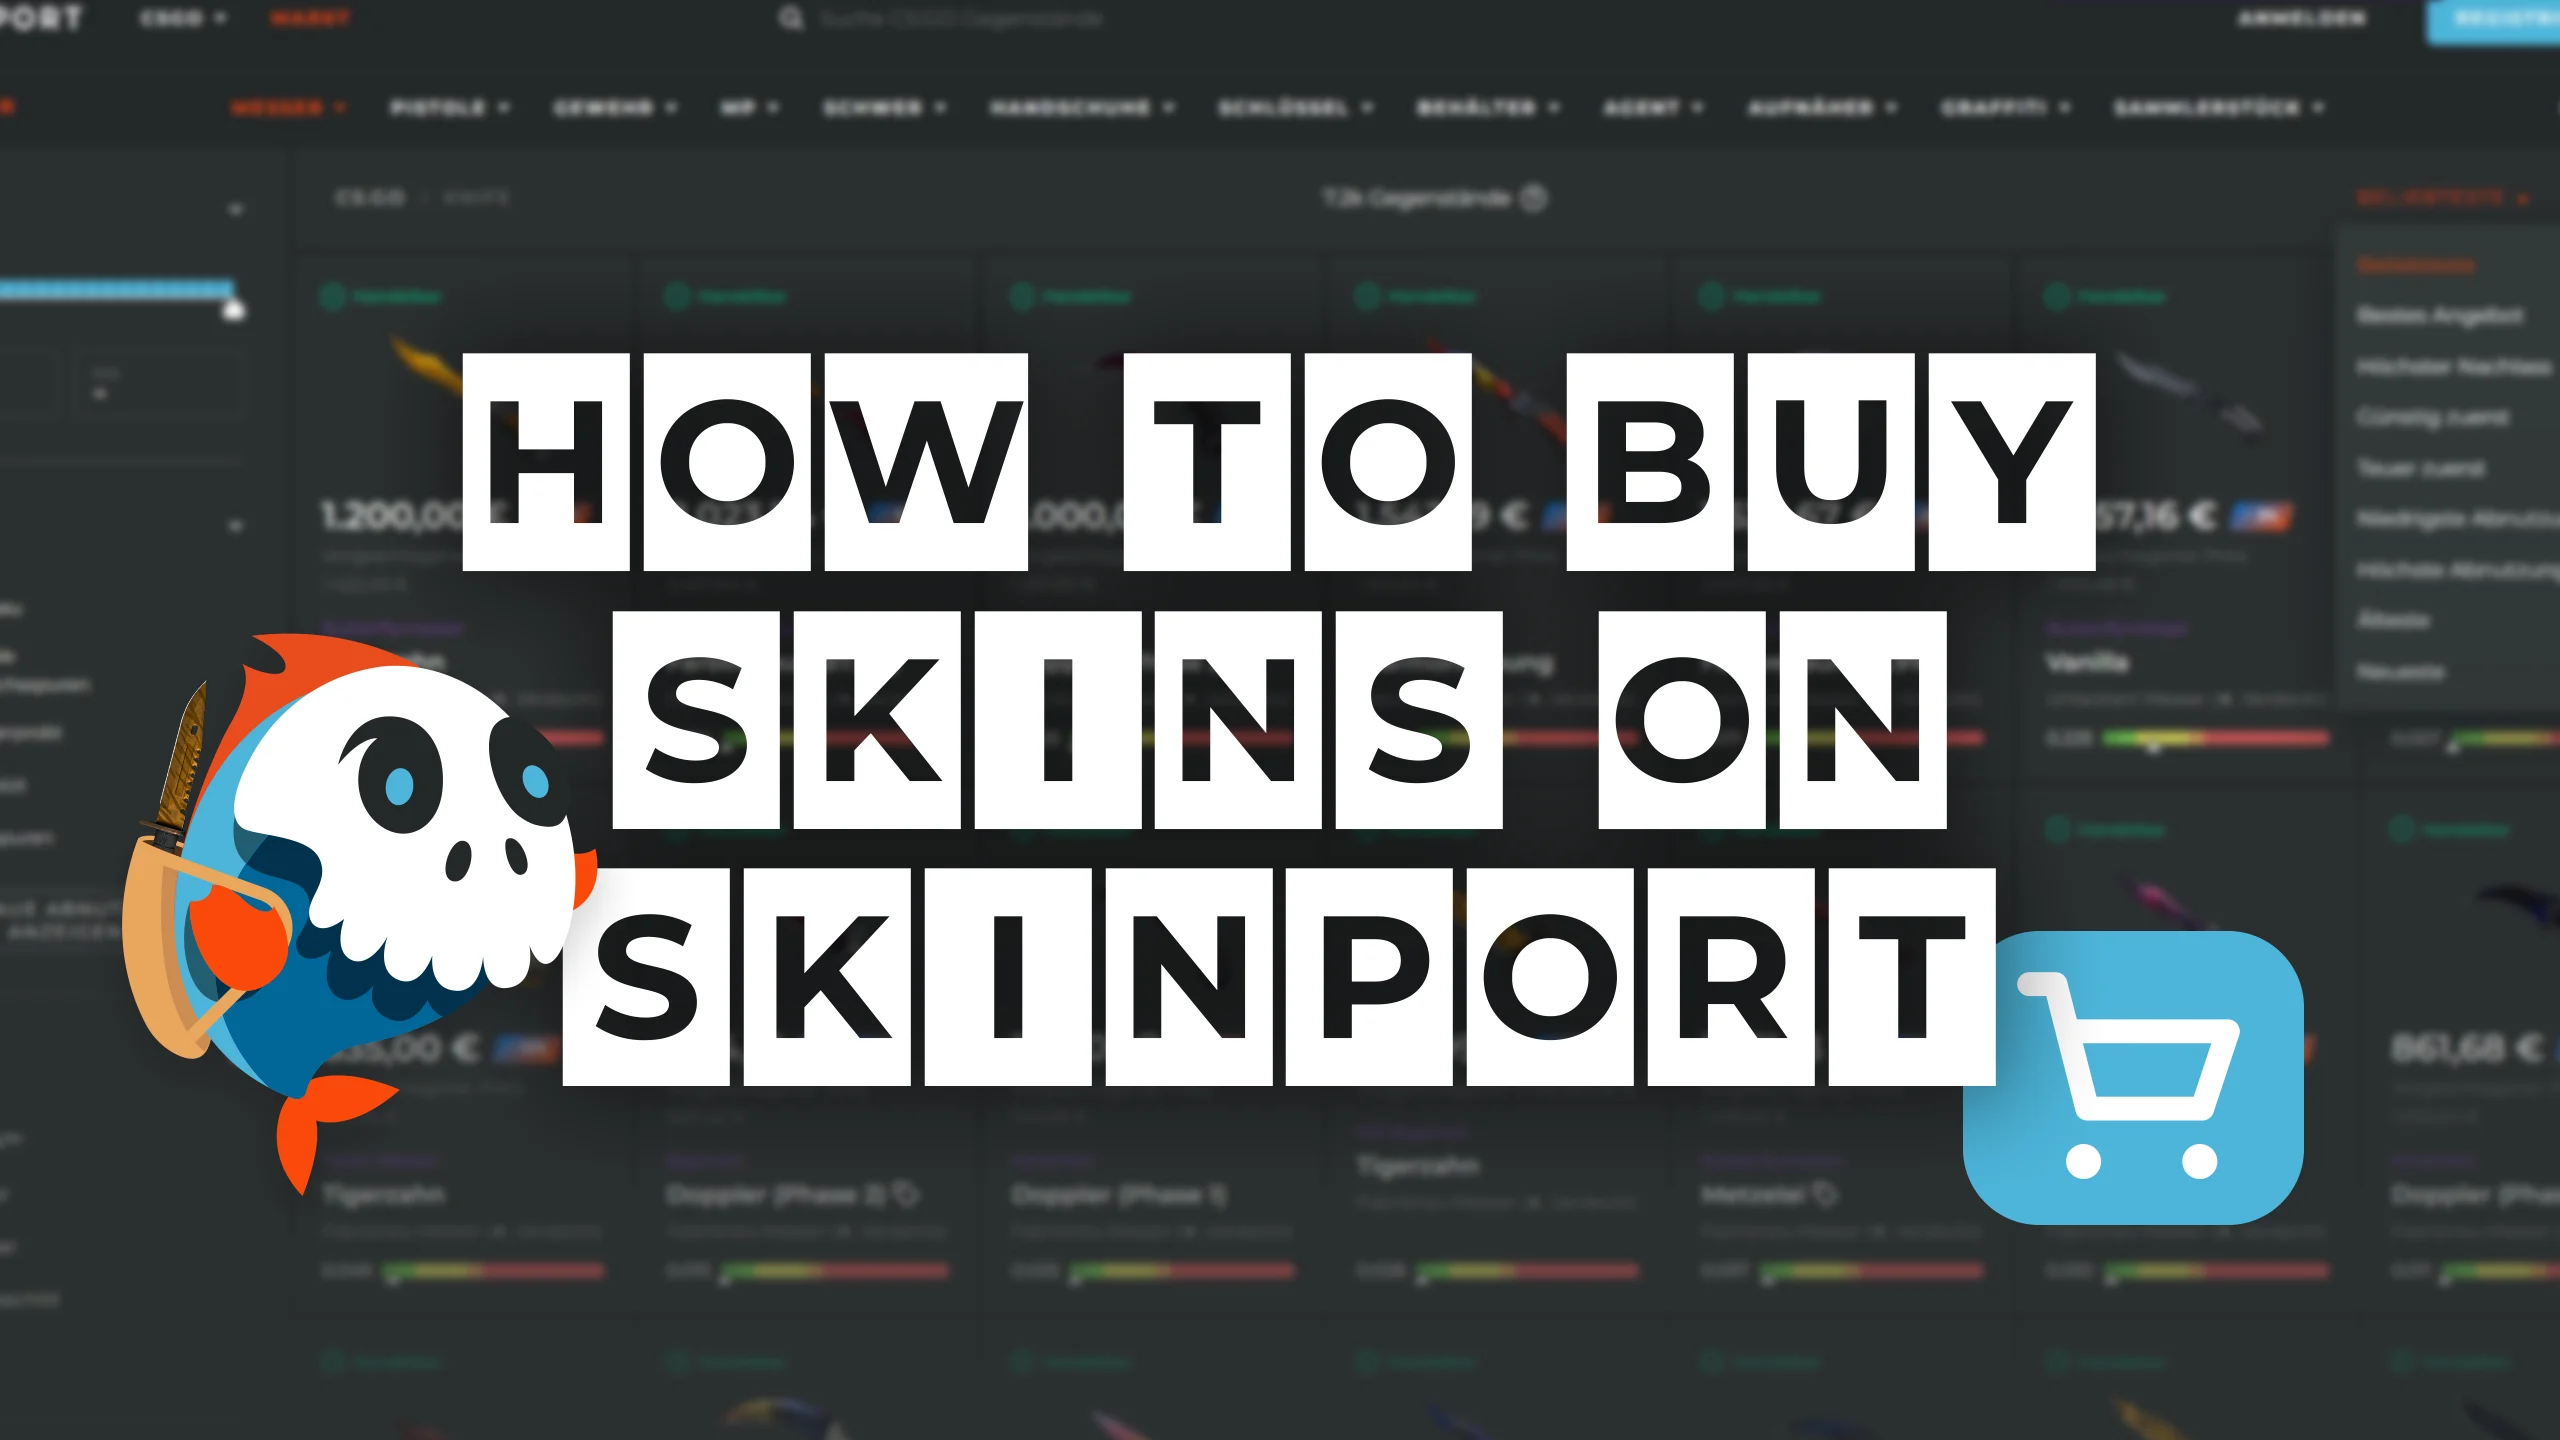 How to Buy Skins on Skinport